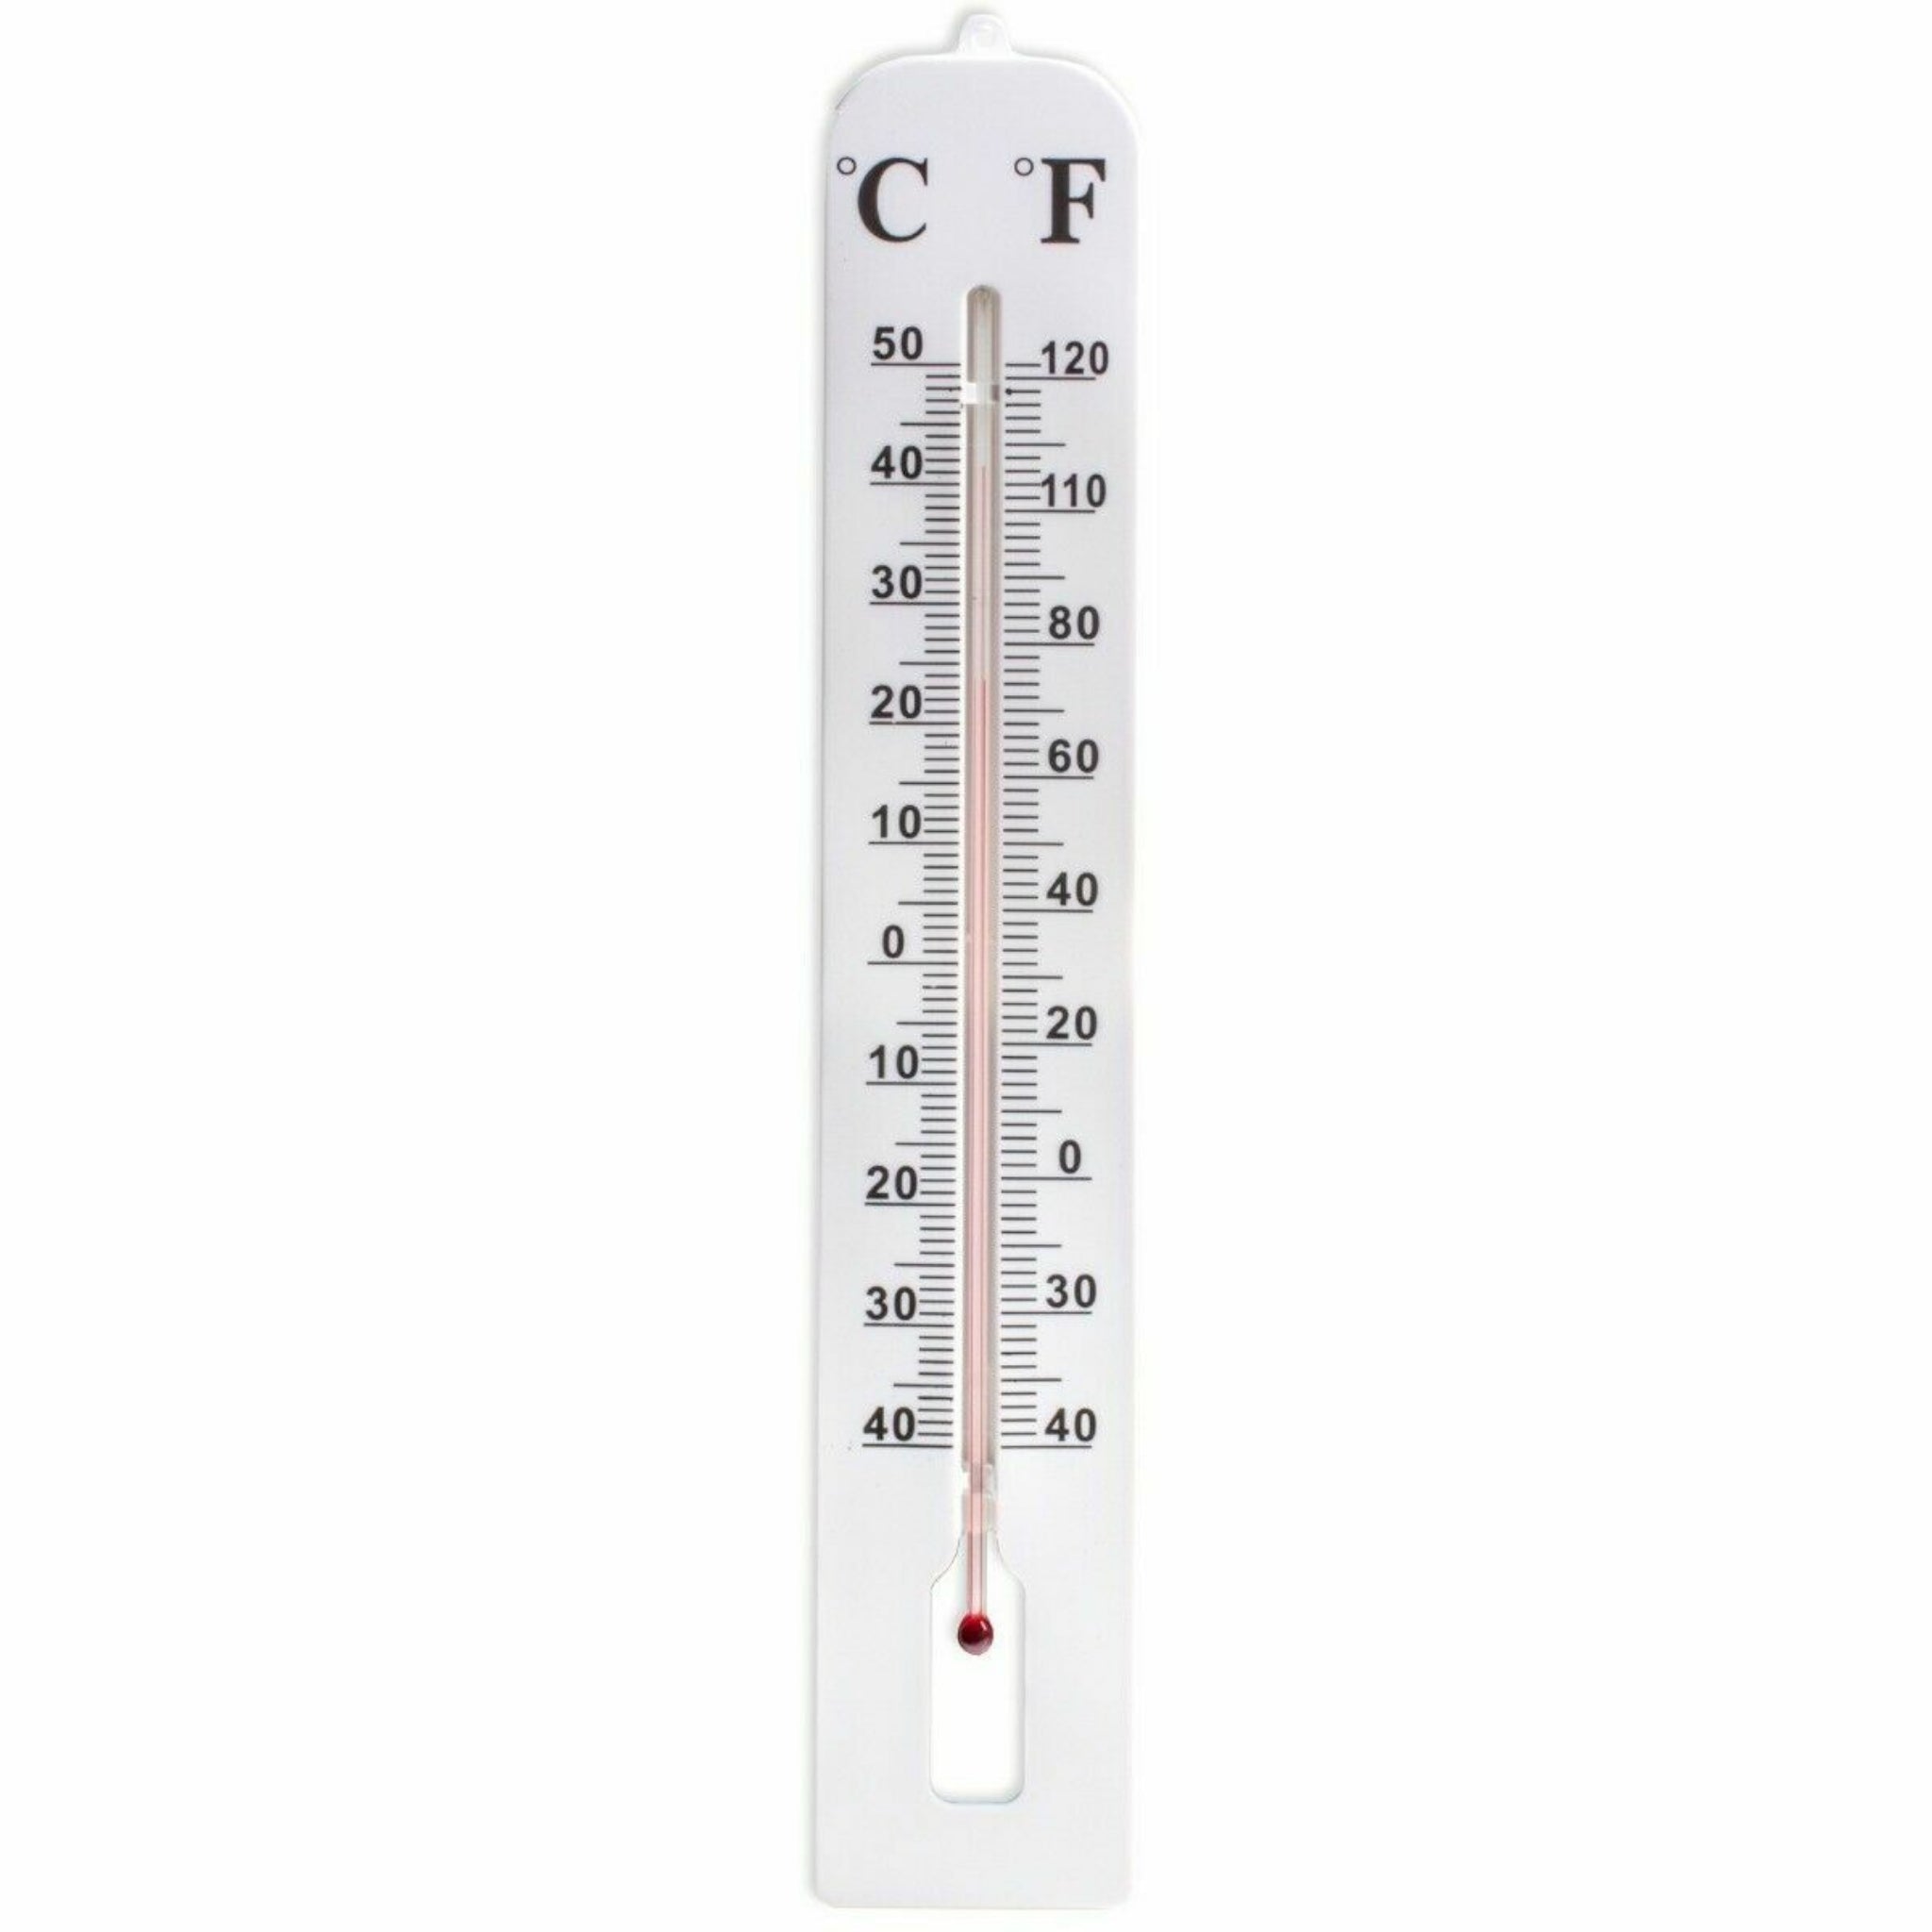 Beclen Harp Indoor/Outdoor Thermometer Wall Large Jumbo Giant 40x6 cm Celsius and Fahrenheit